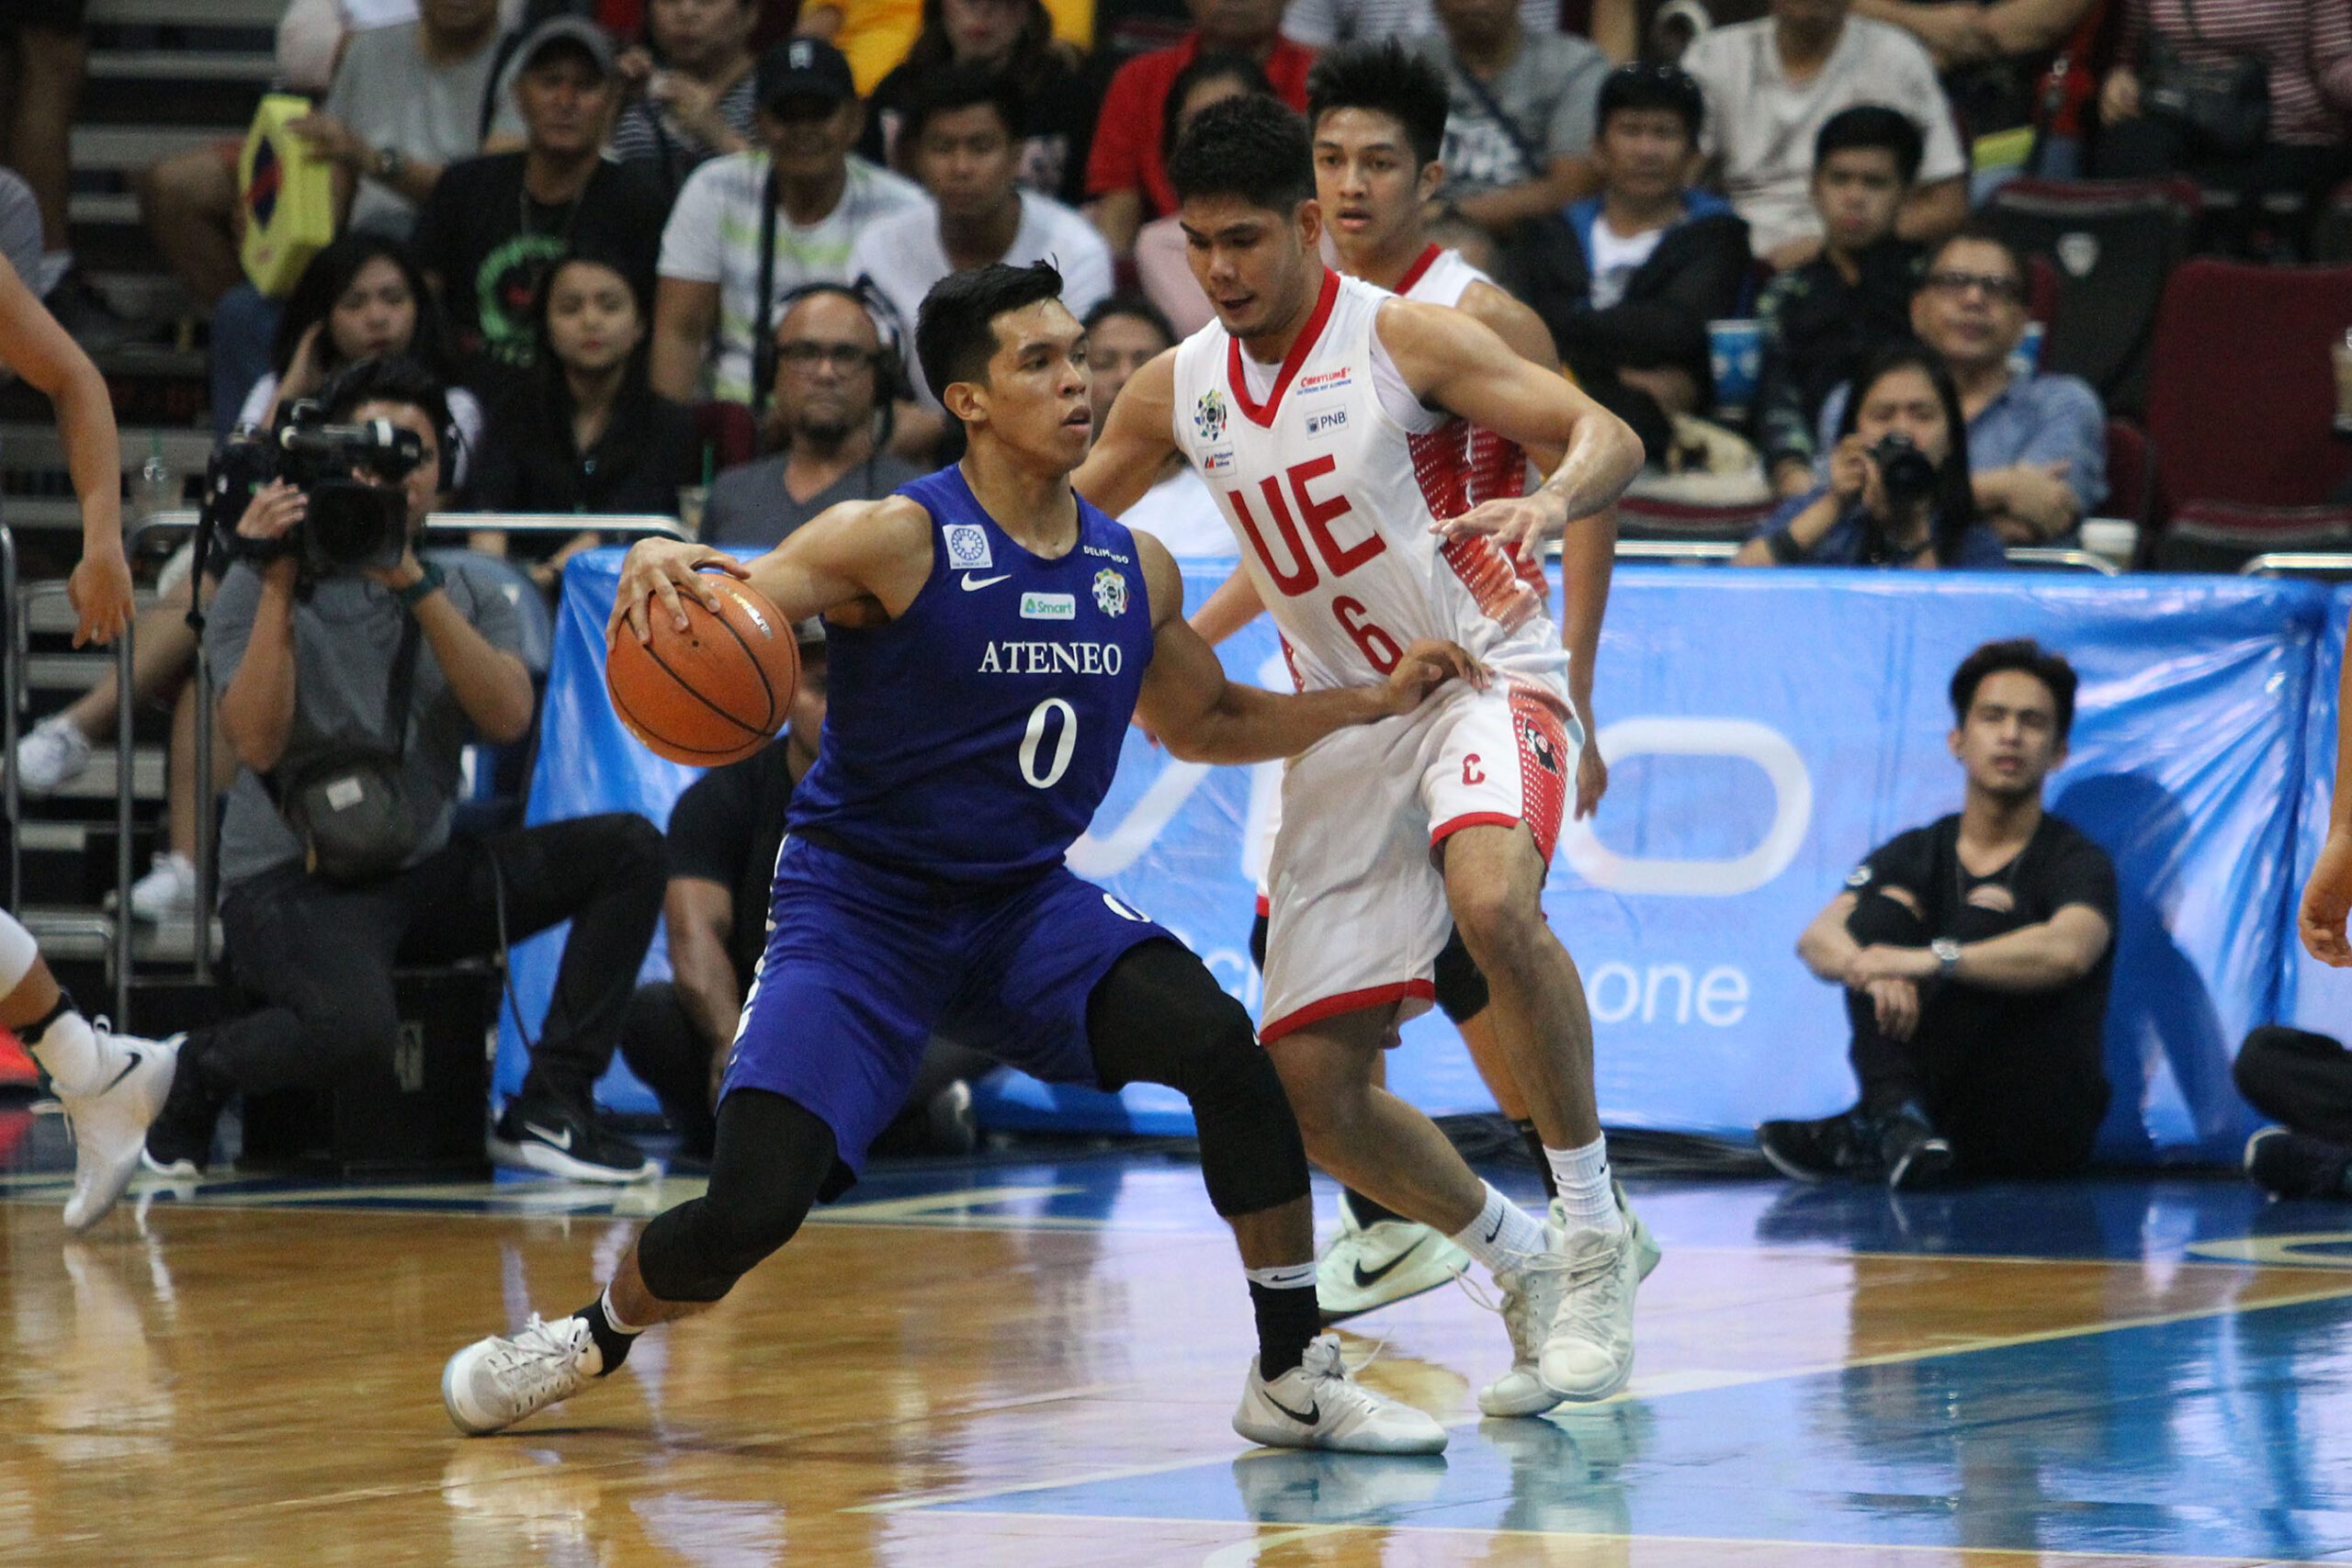 Ateneo Blue Eagles clinch twice-to-beat in their biggest blowout win of the season